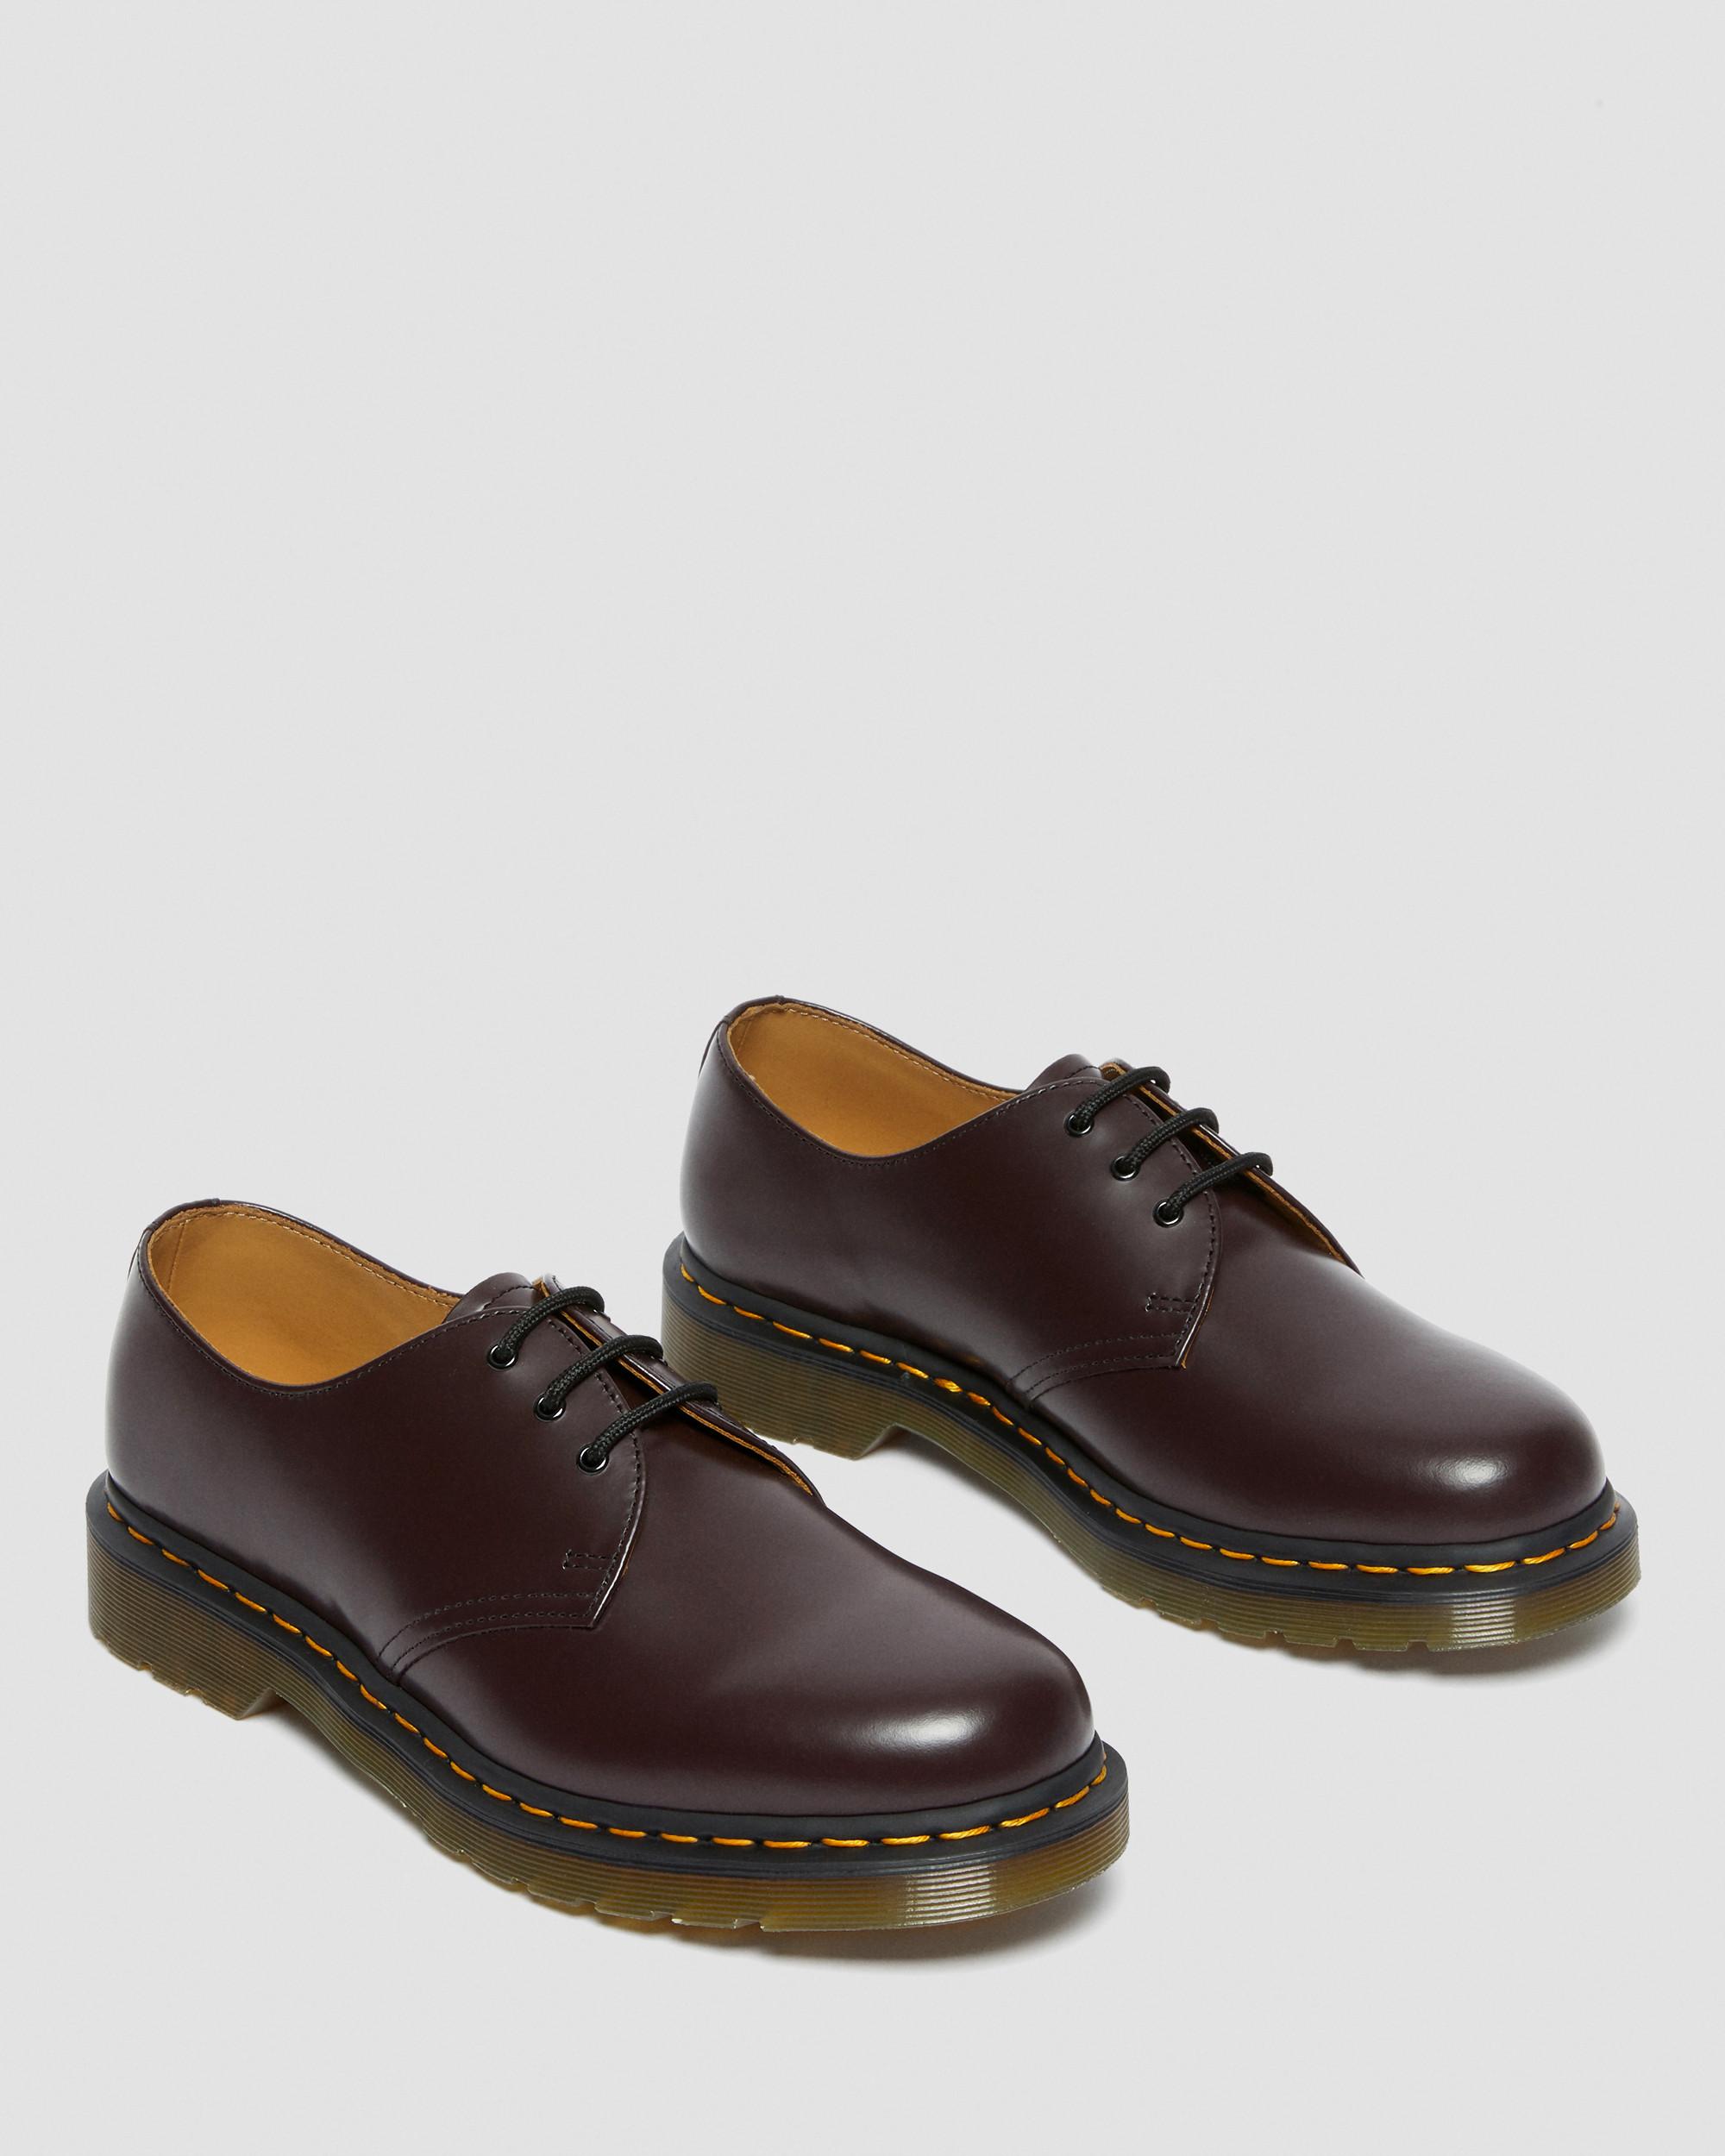 1461 Smooth Leather Oxford Shoes, Burgundy | Dr. Martens